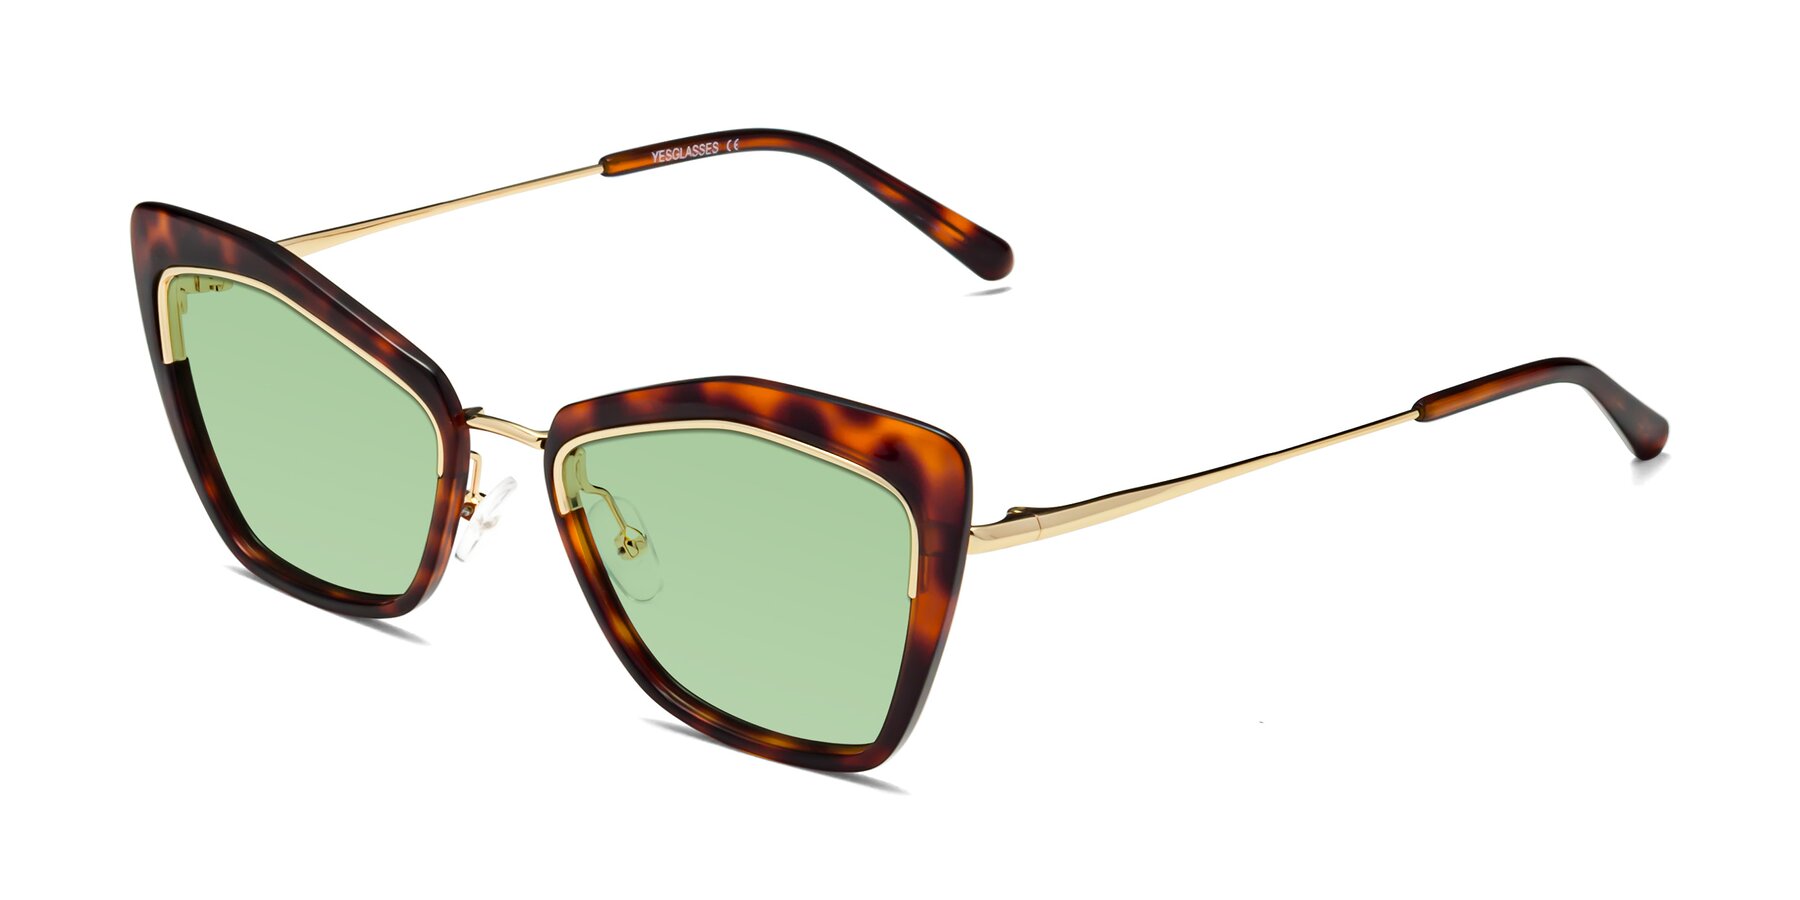 Angle of Lasso in Light Tortoise with Medium Green Tinted Lenses